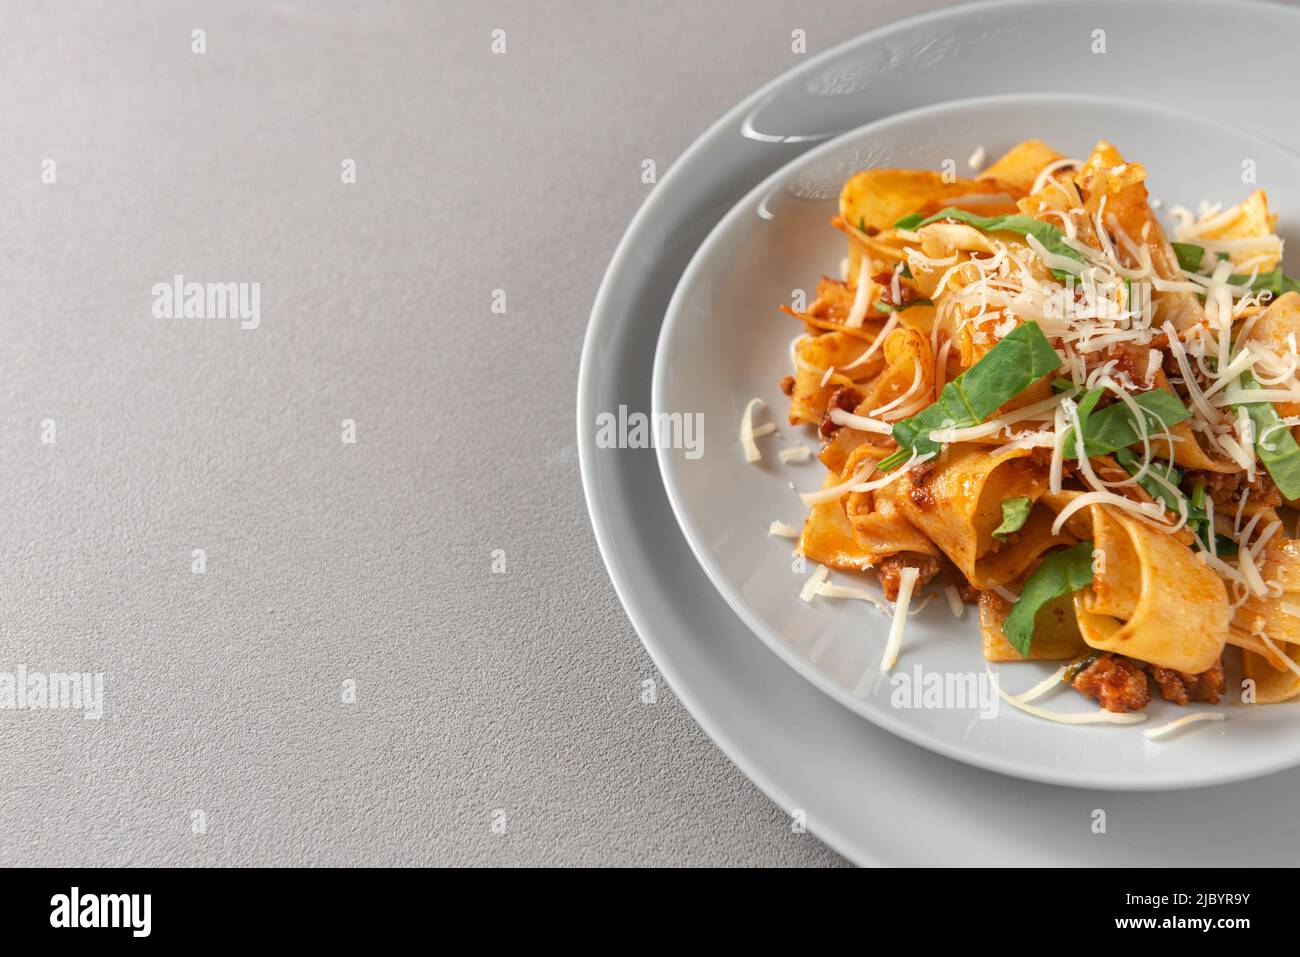 Pasta pappardelle with beef ragout sauce in black bowl. Grey background. Top view. Stock Photo